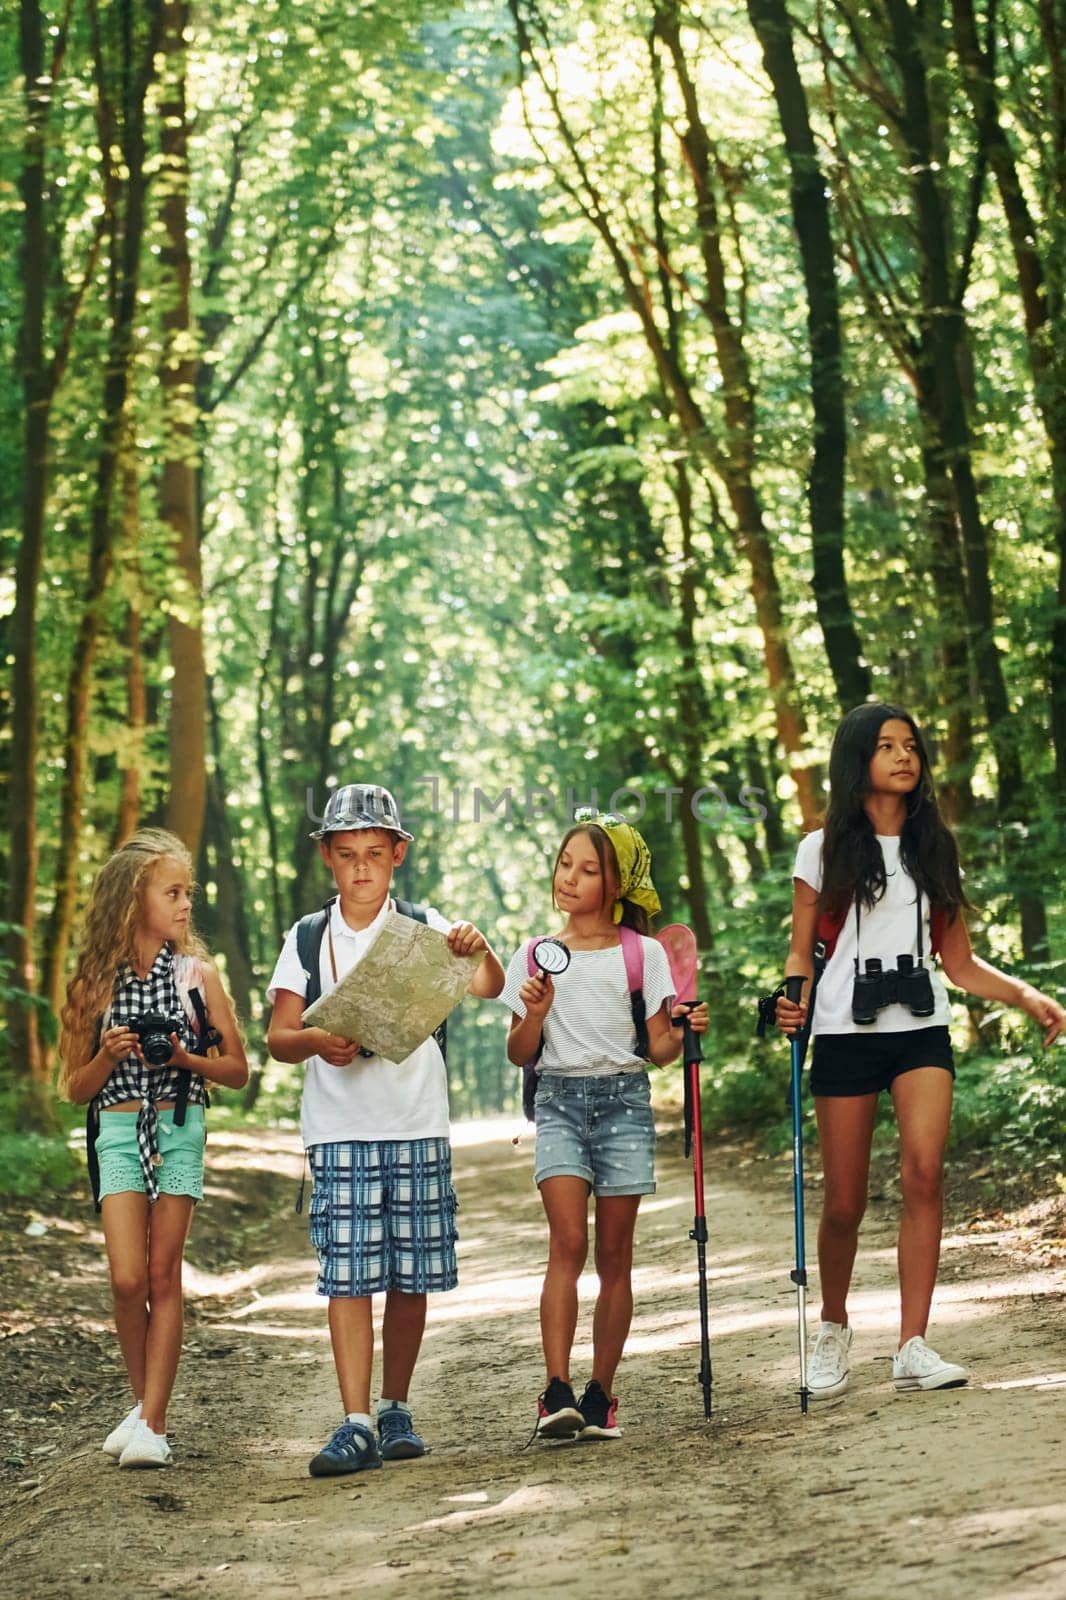 With map. Kids strolling in the forest with travel equipment.